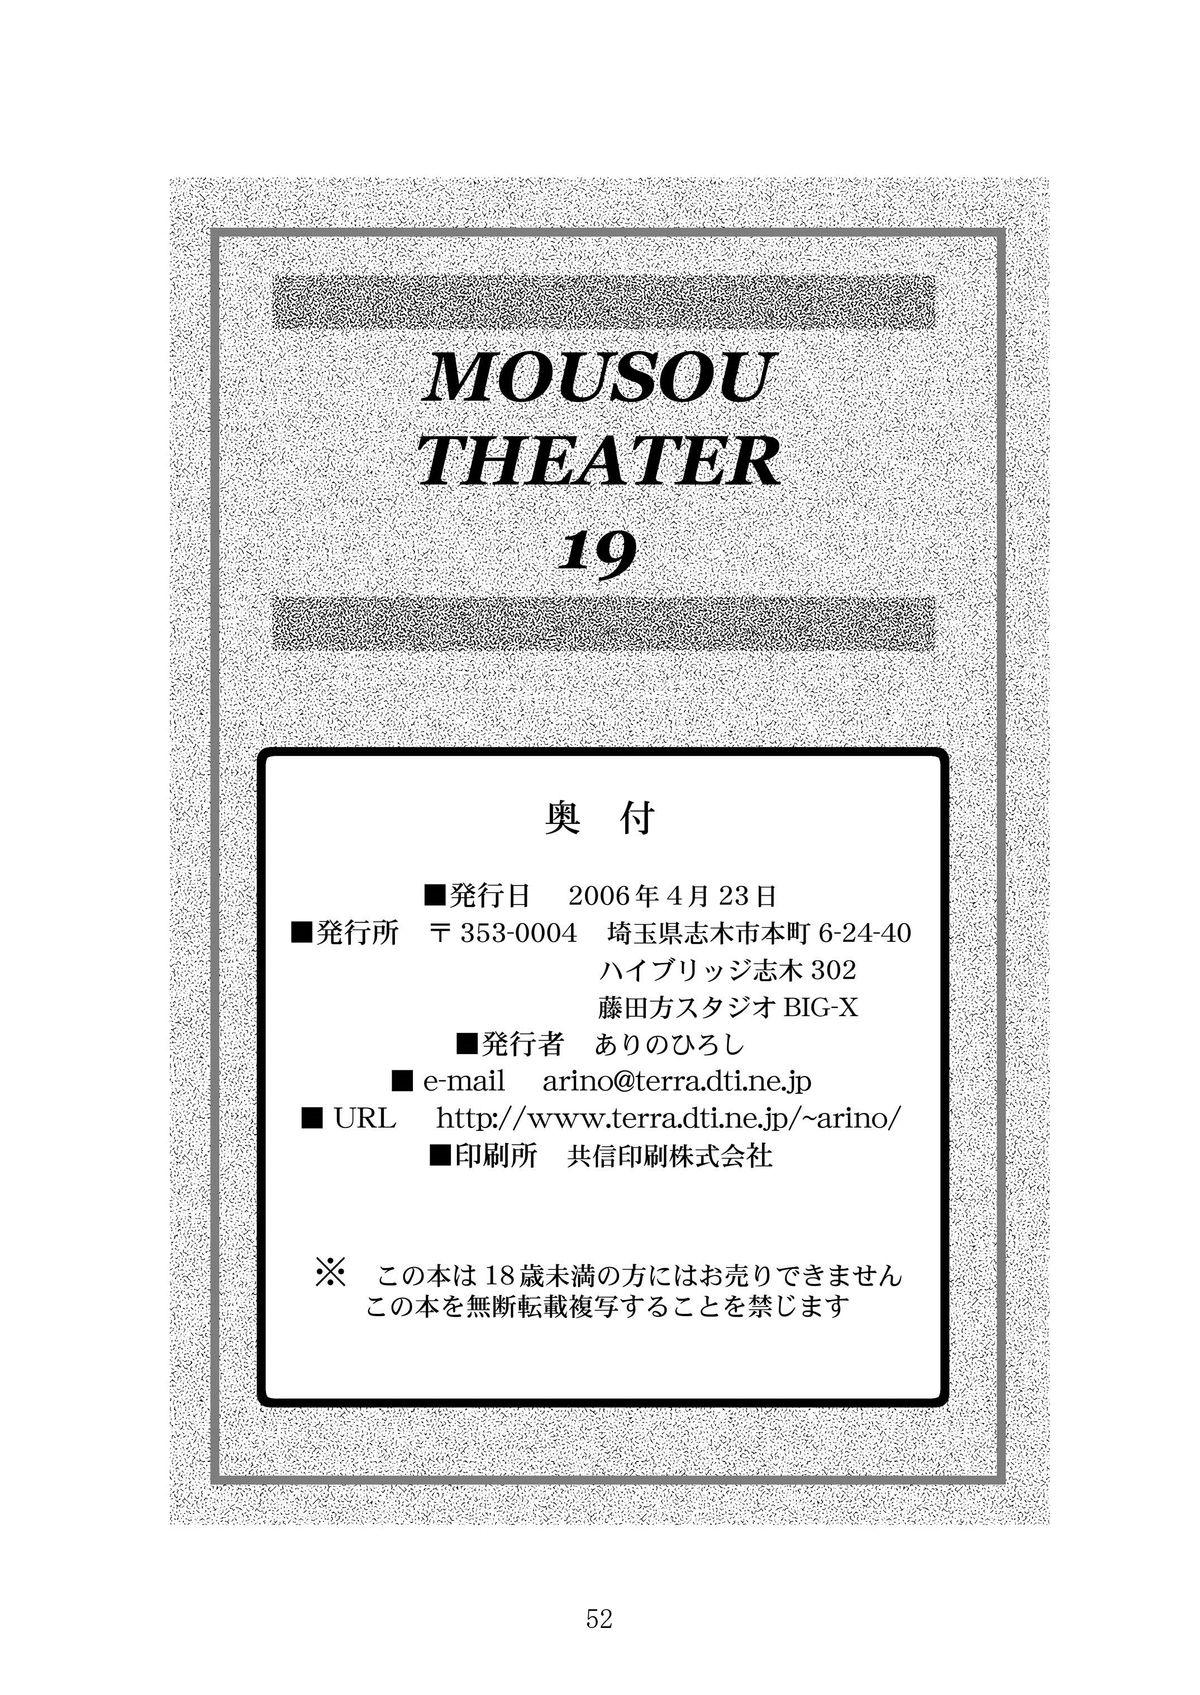 MOUSOU THEATER 19 51